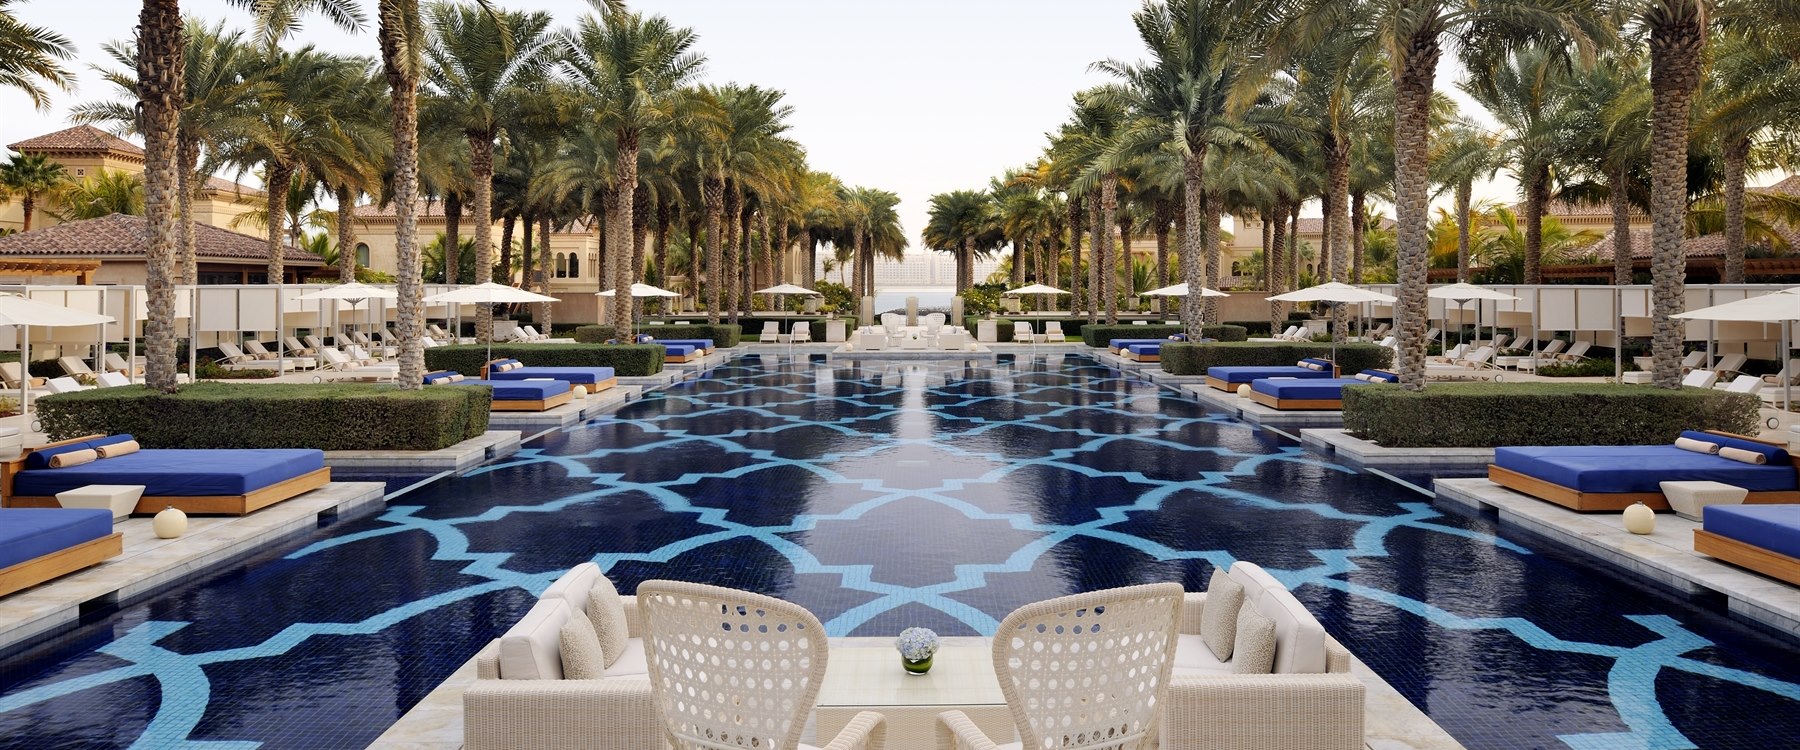 Swimming pool at One&Only The Palm, Dubai